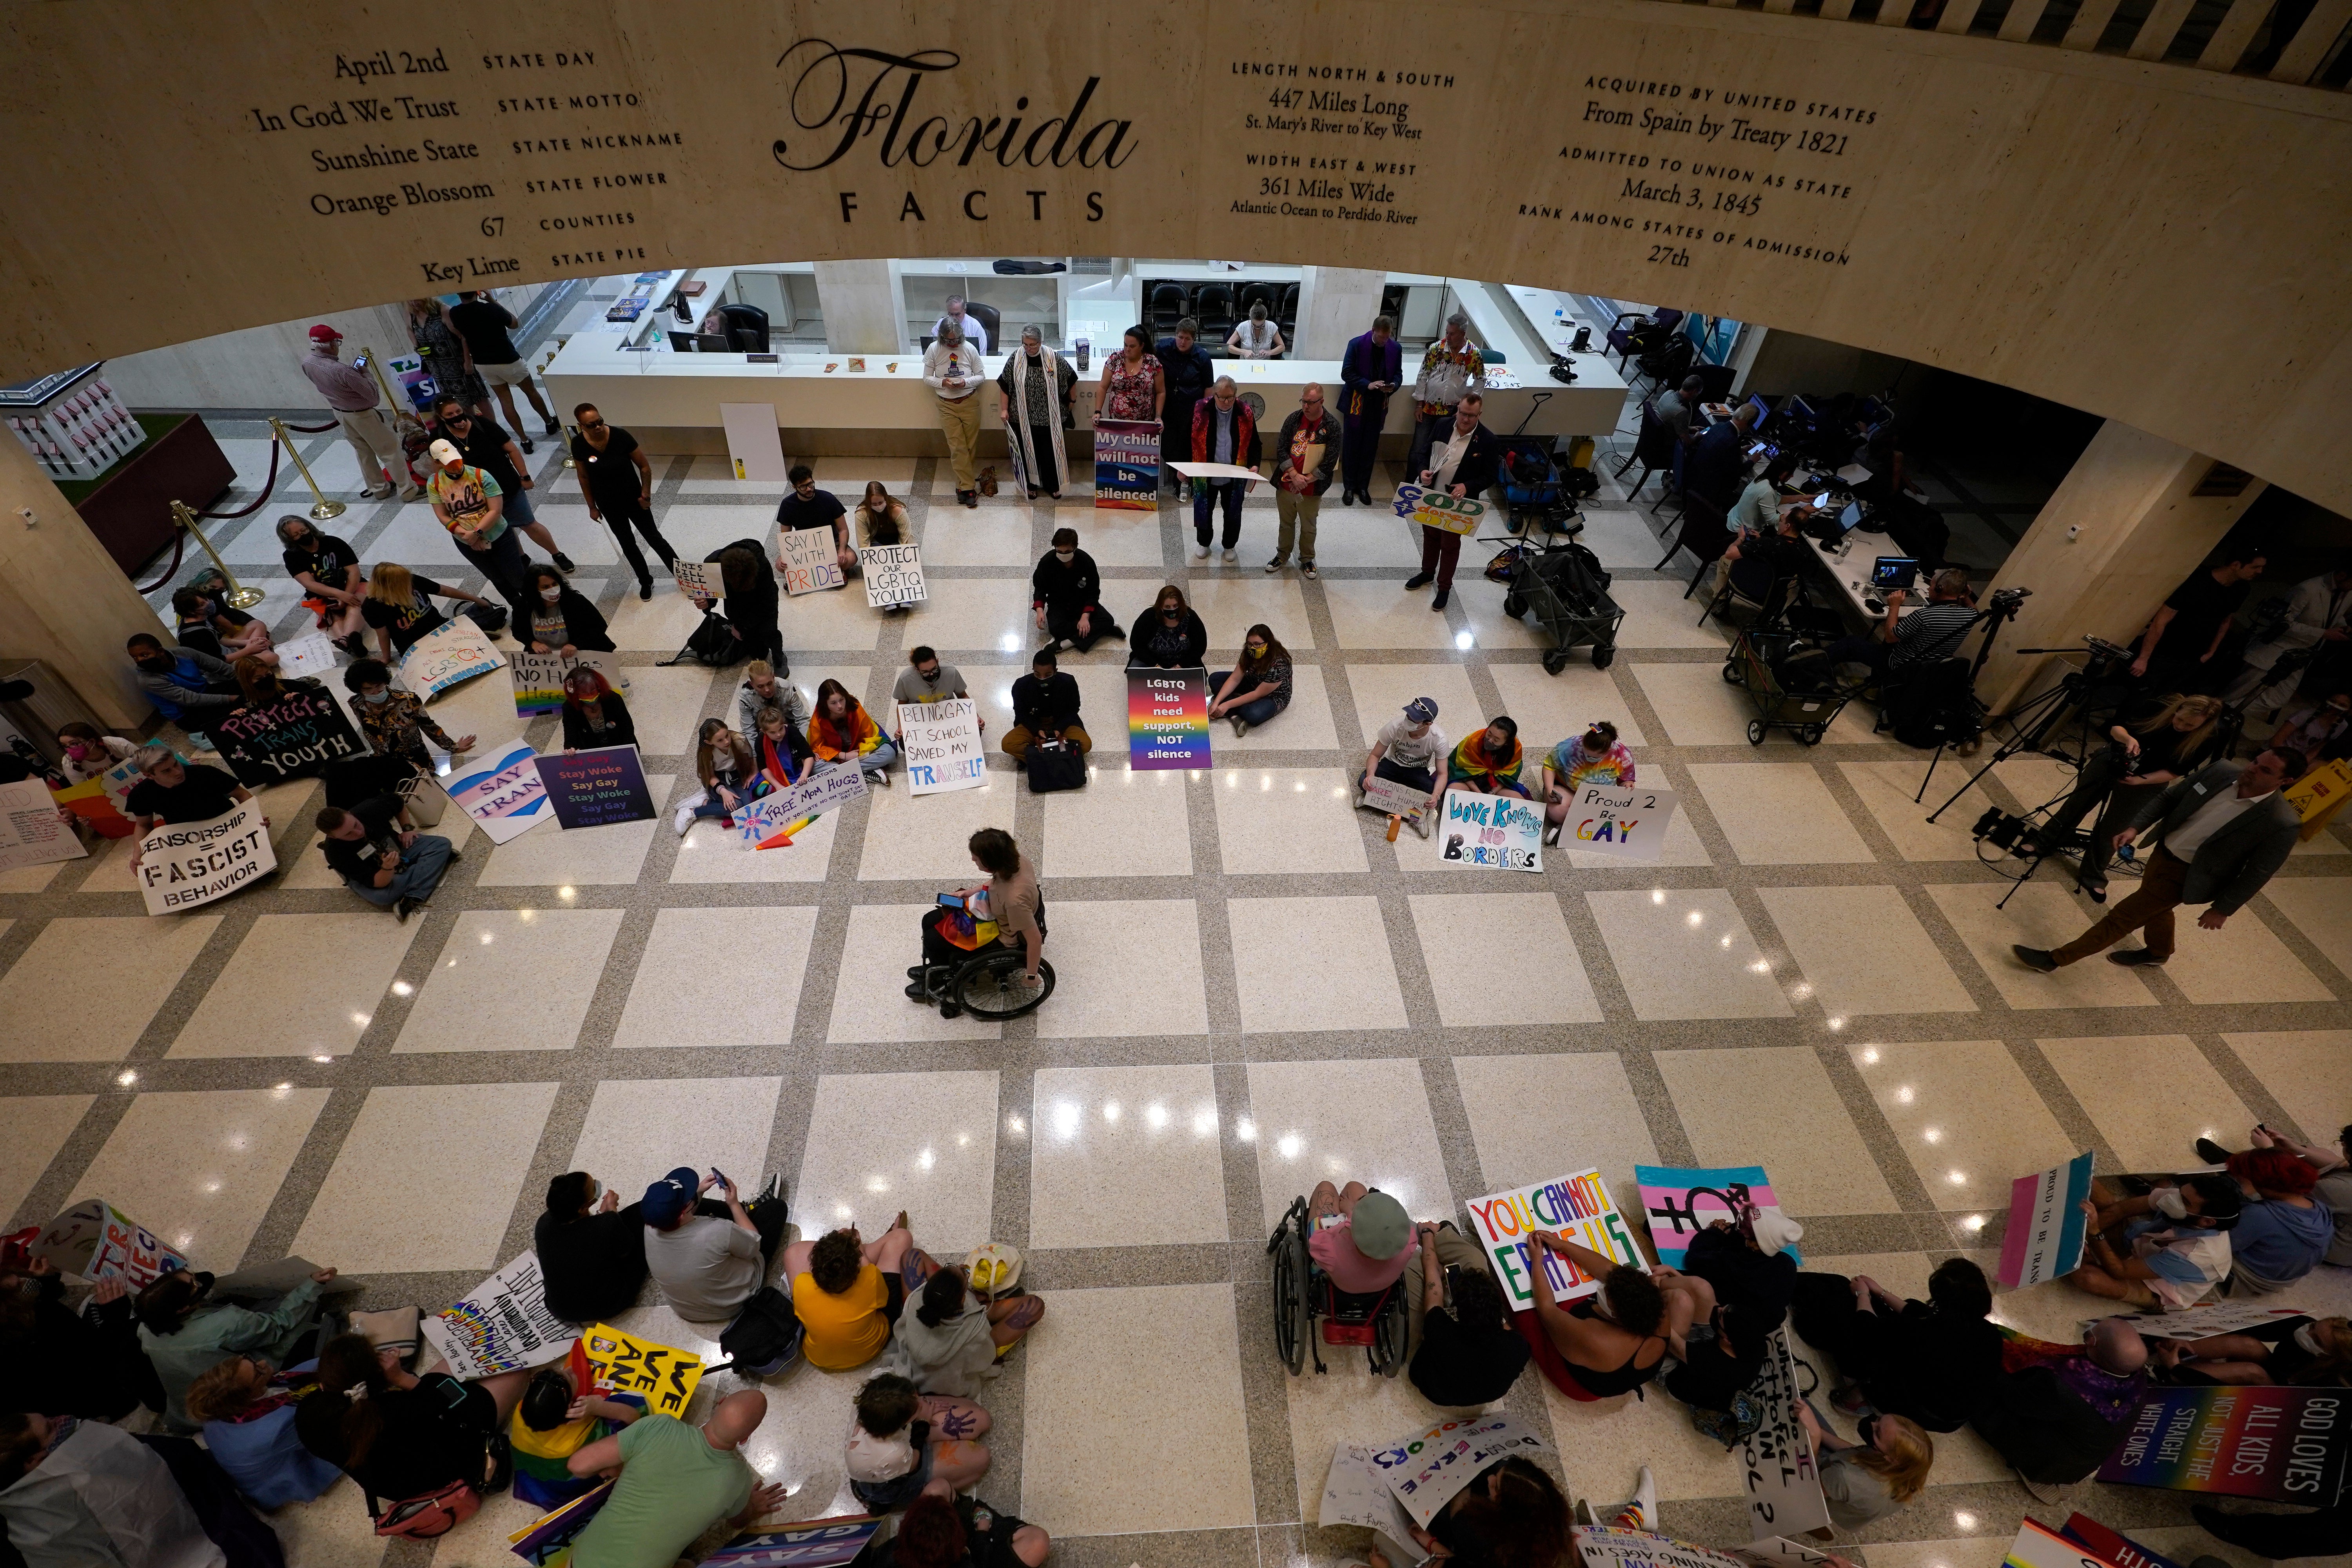 Protesters stage a sit-in inside Florida’s Capitol building on 7 March against so-called ‘Don’t Say Gay’ legislation.